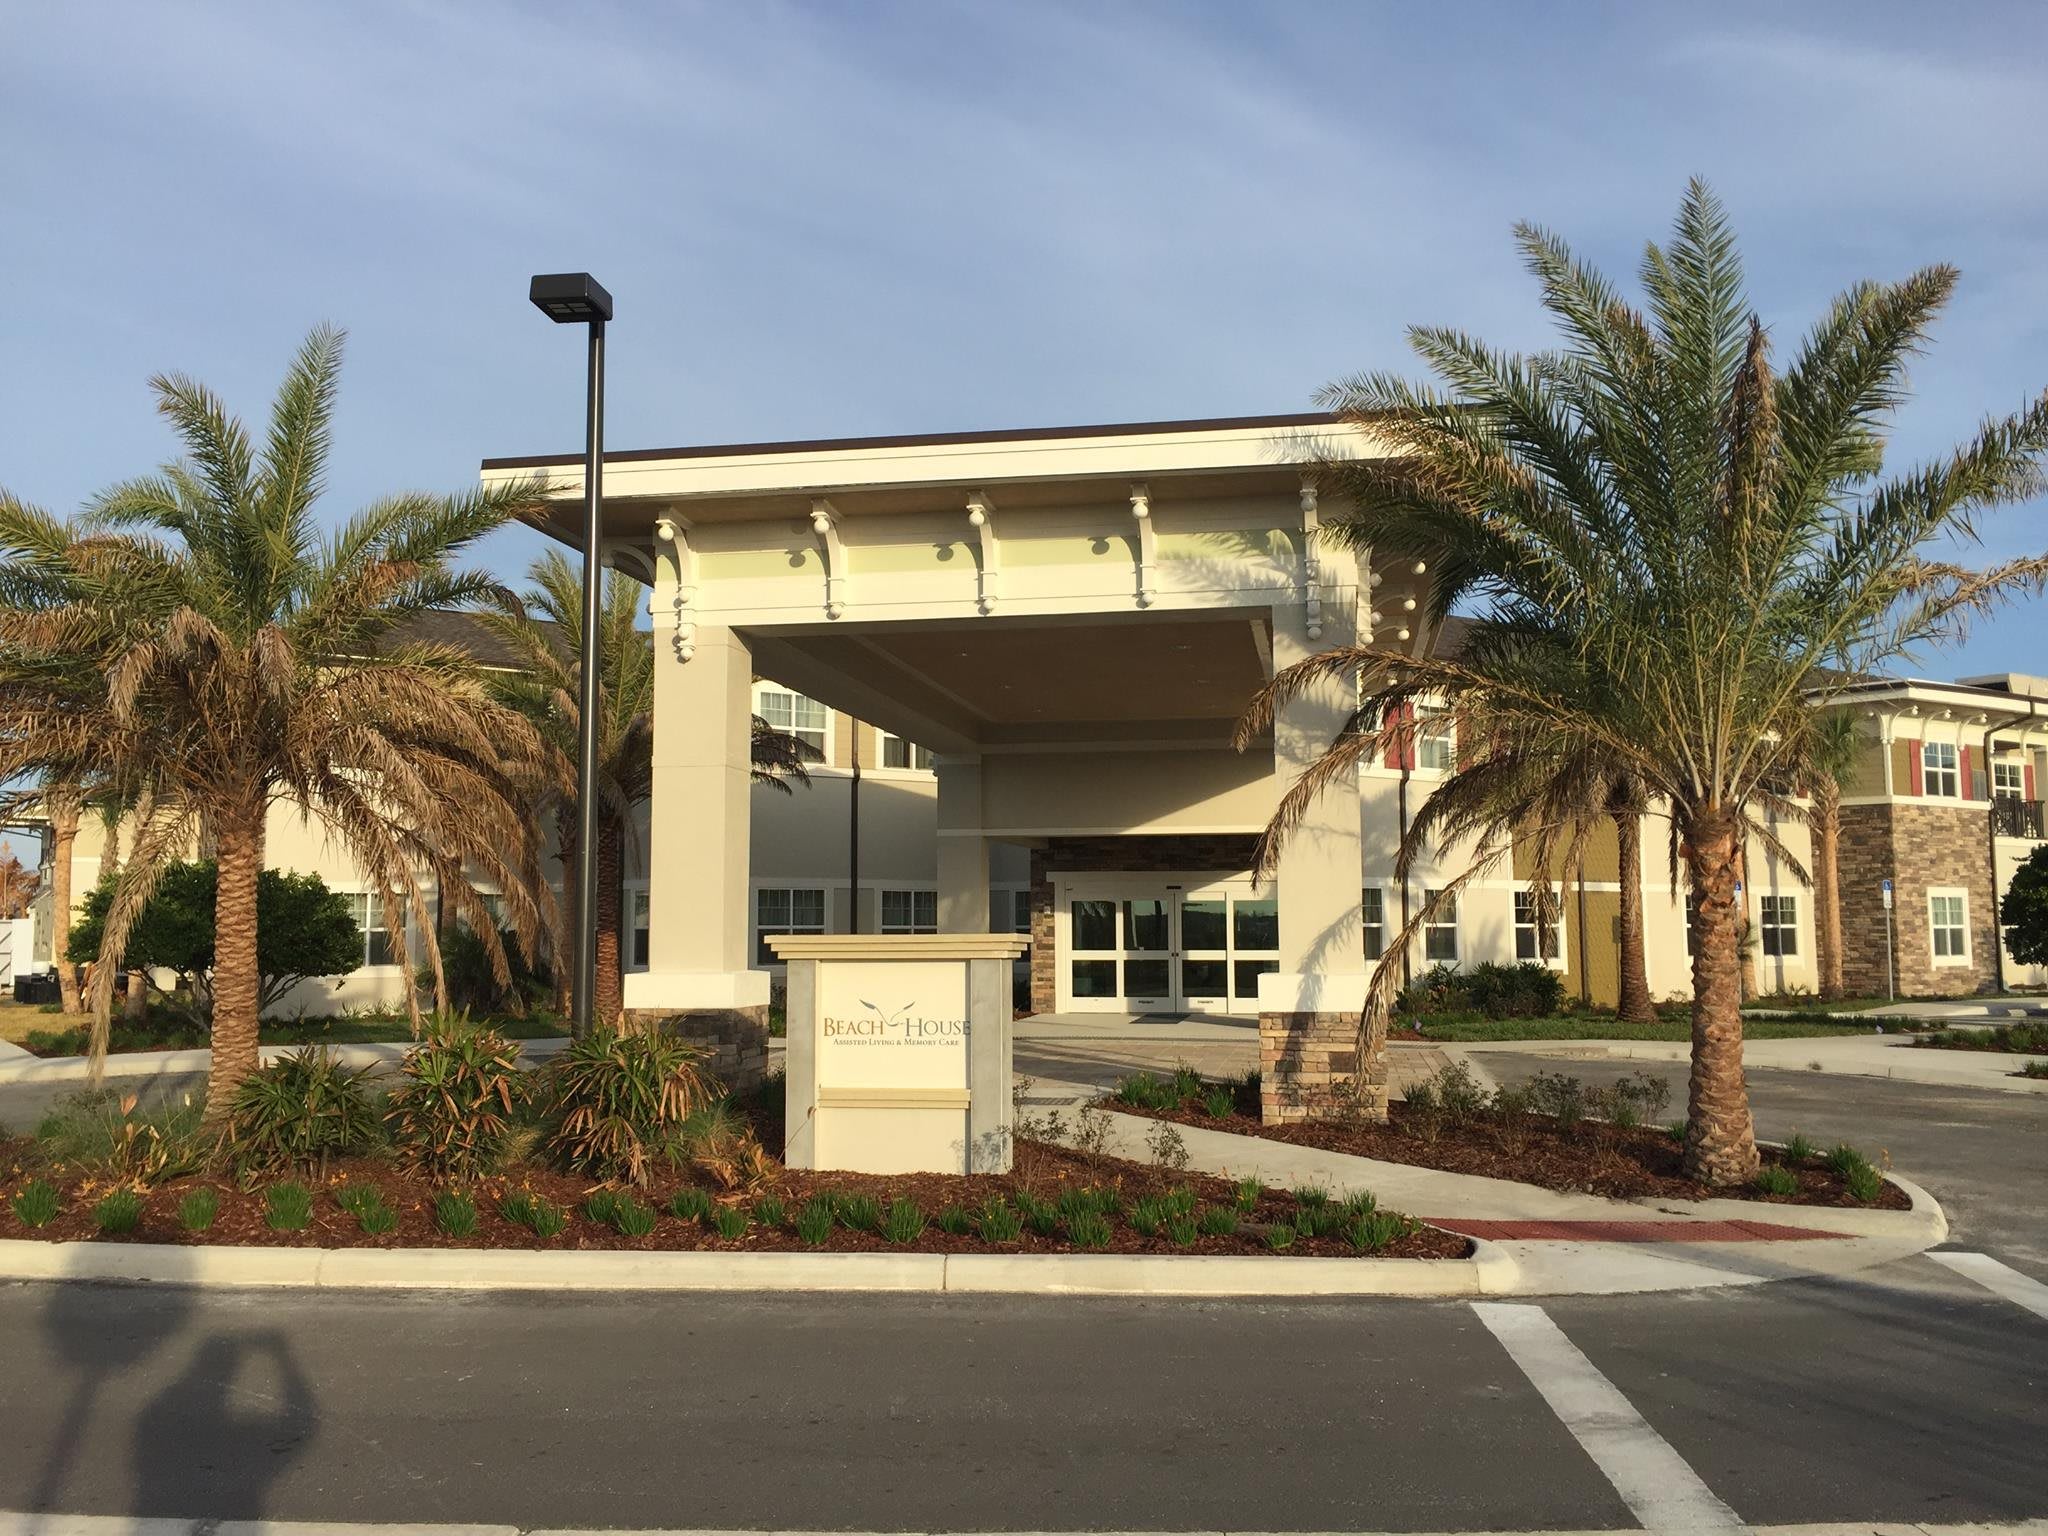 Beach House Assisted Living and Memory Care at Wiregrass Ranch community exterior